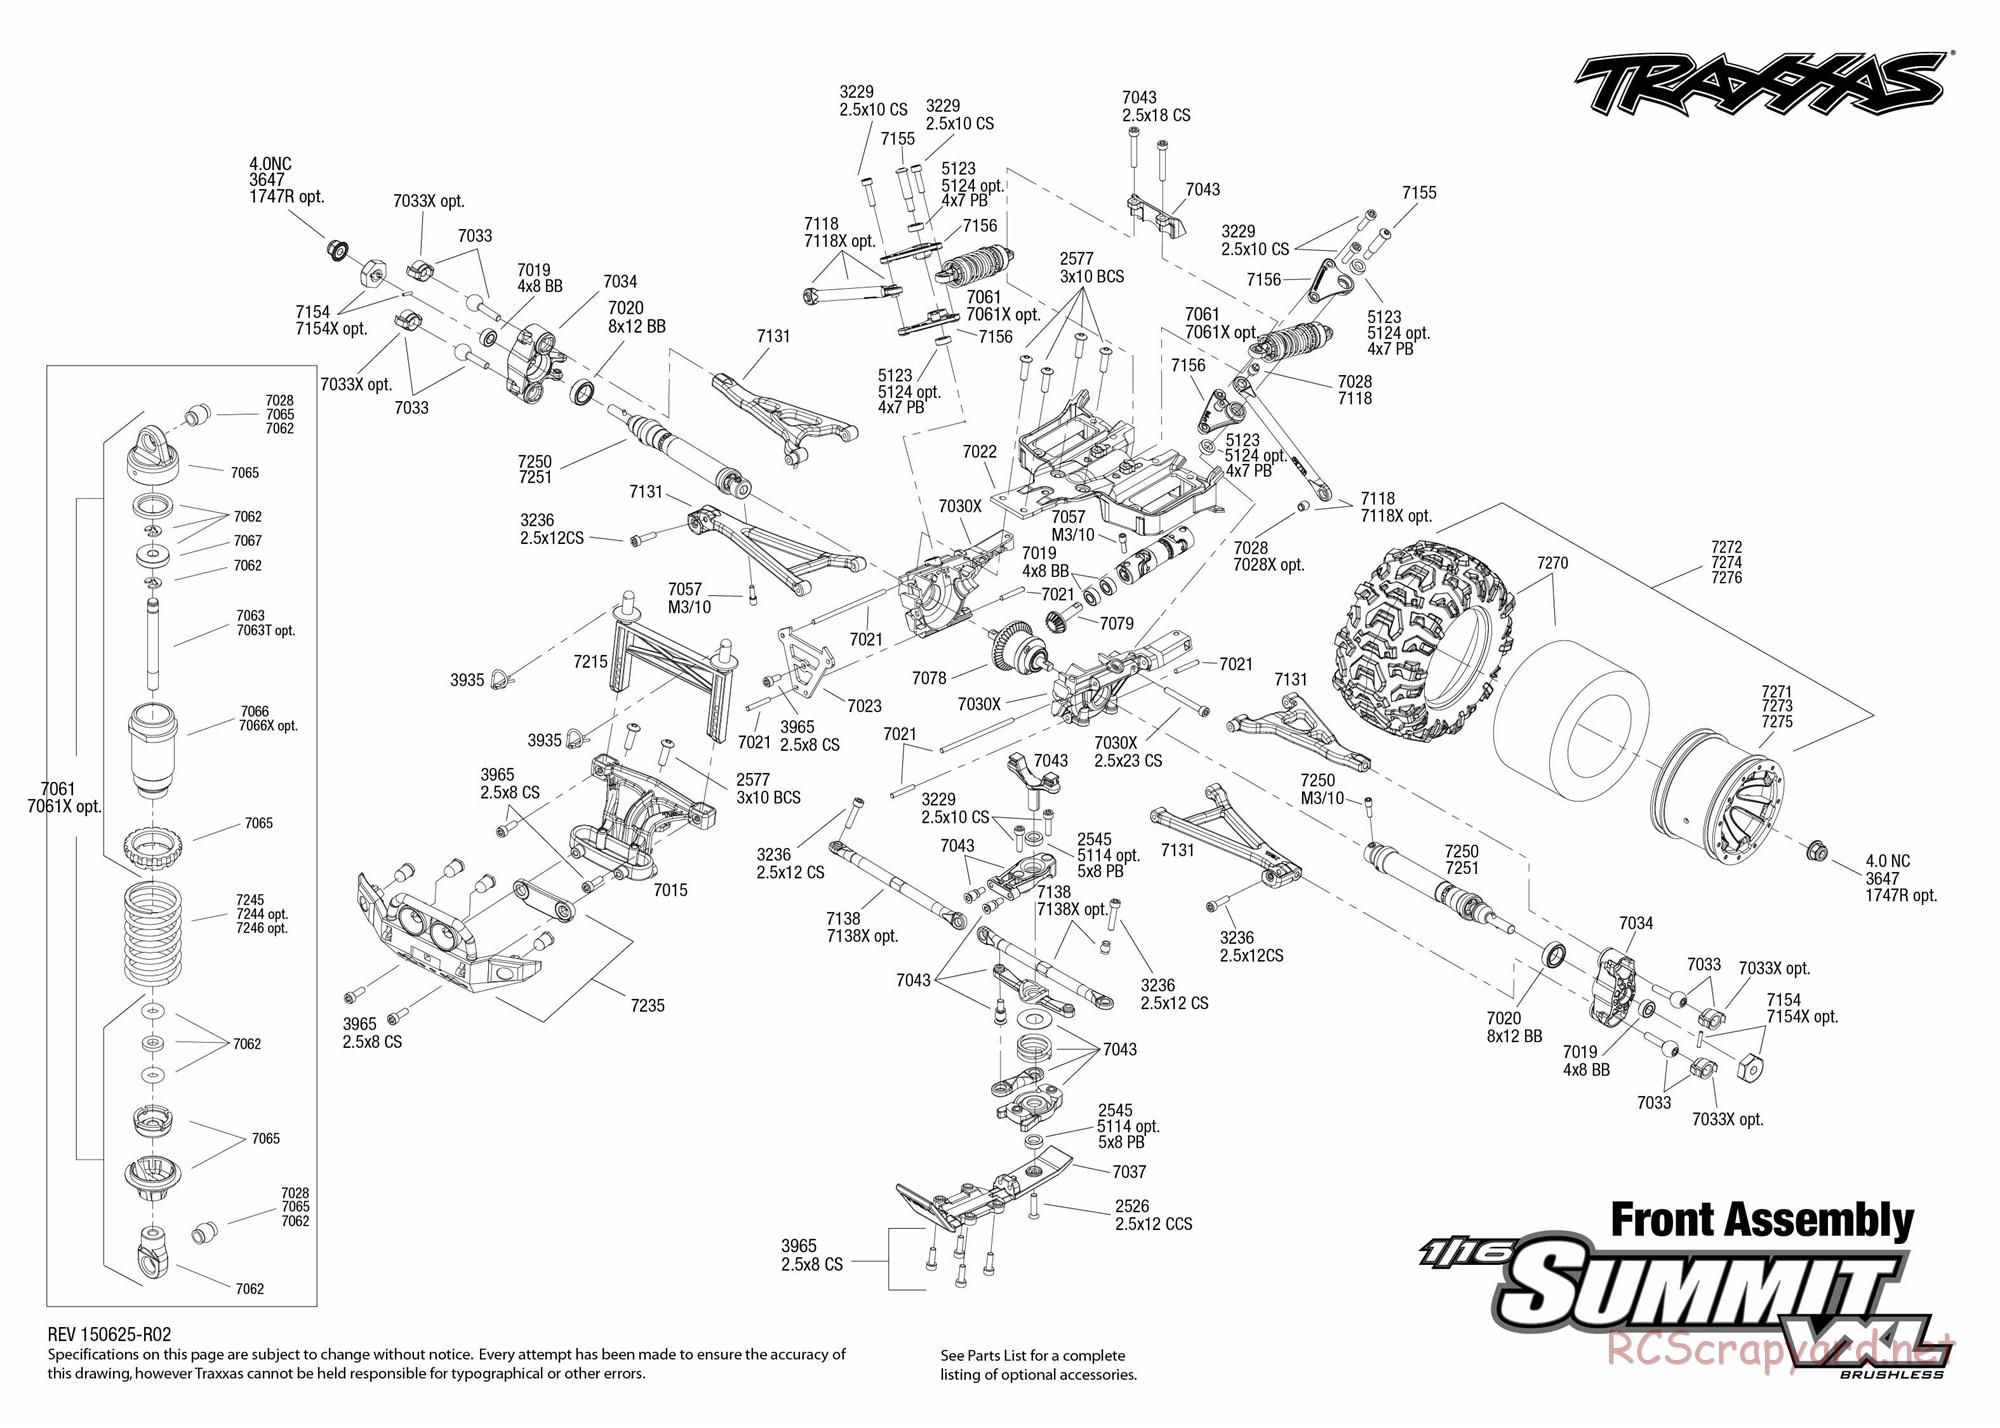 Traxxas - 1/16 Summit VXL (2015) - Exploded Views - Page 3